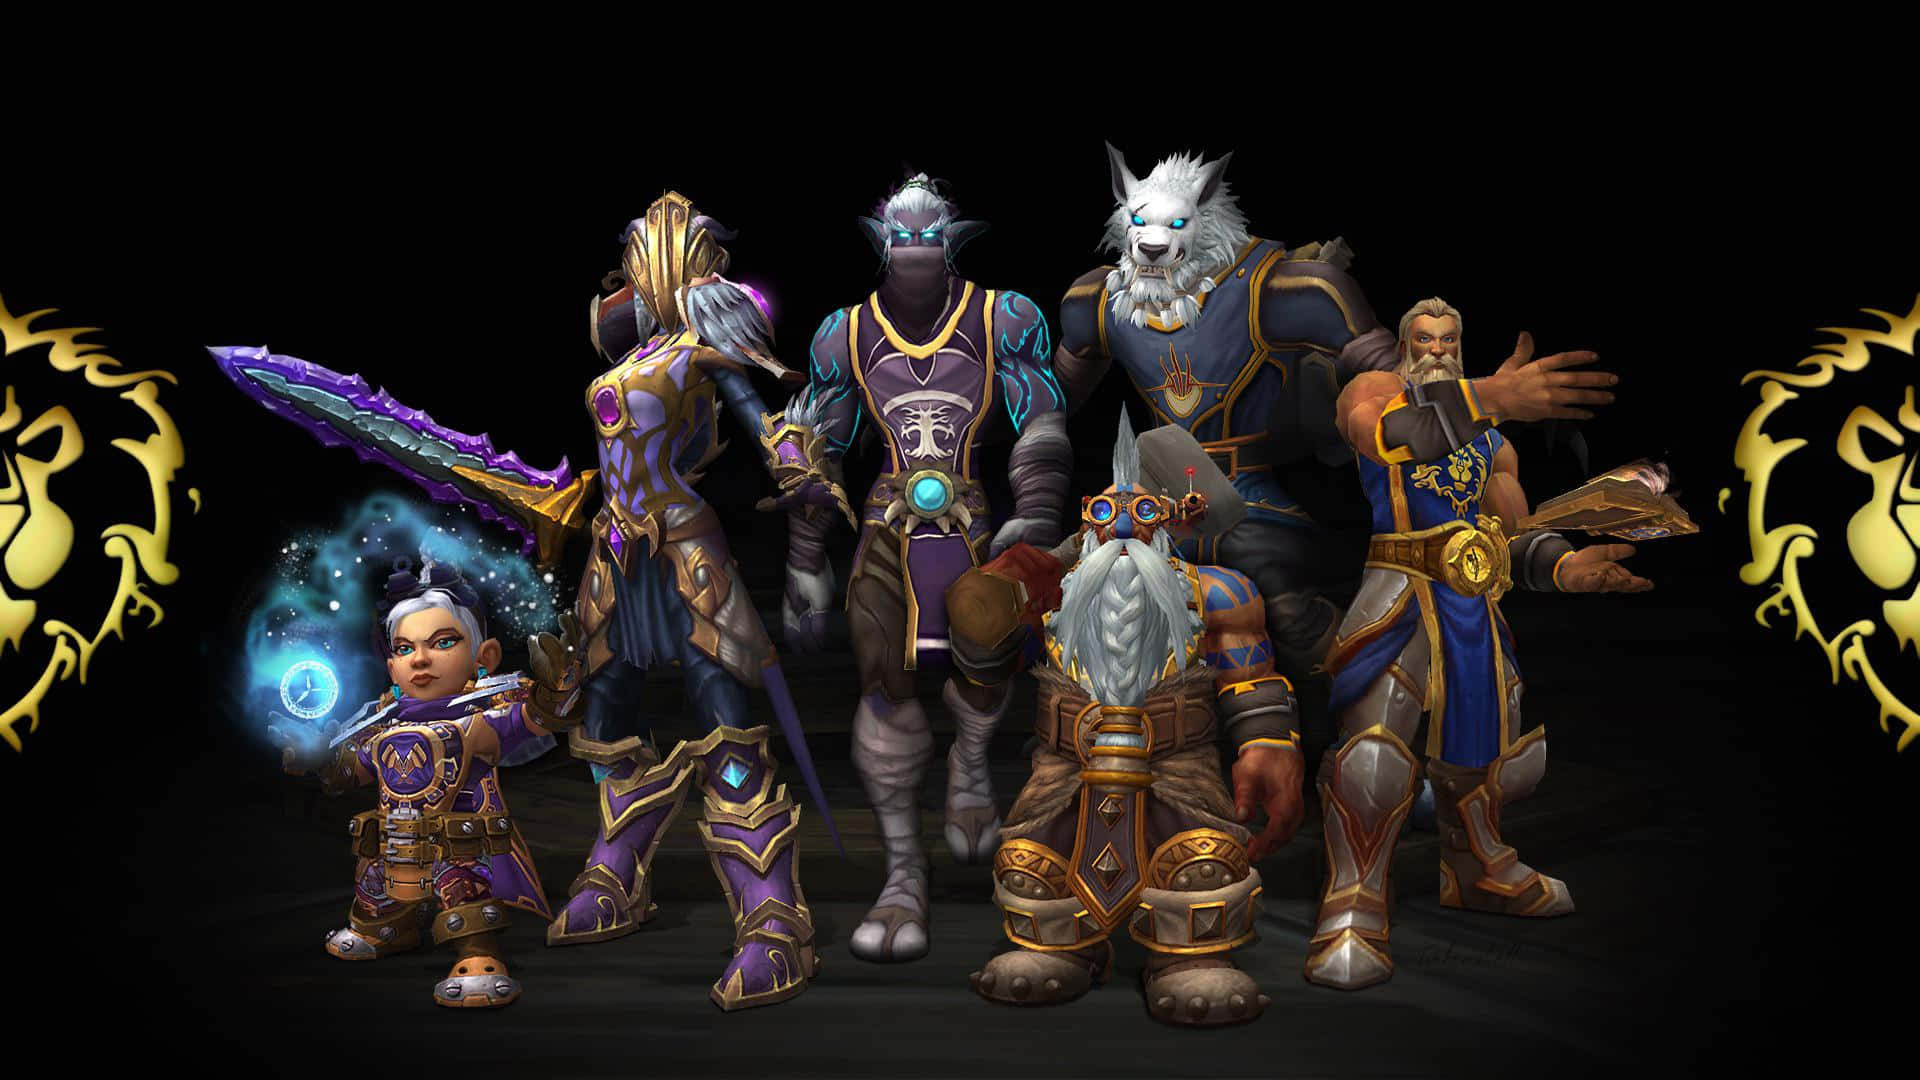 Epic gathering of World of Warcraft races in one stunning image. Wallpaper